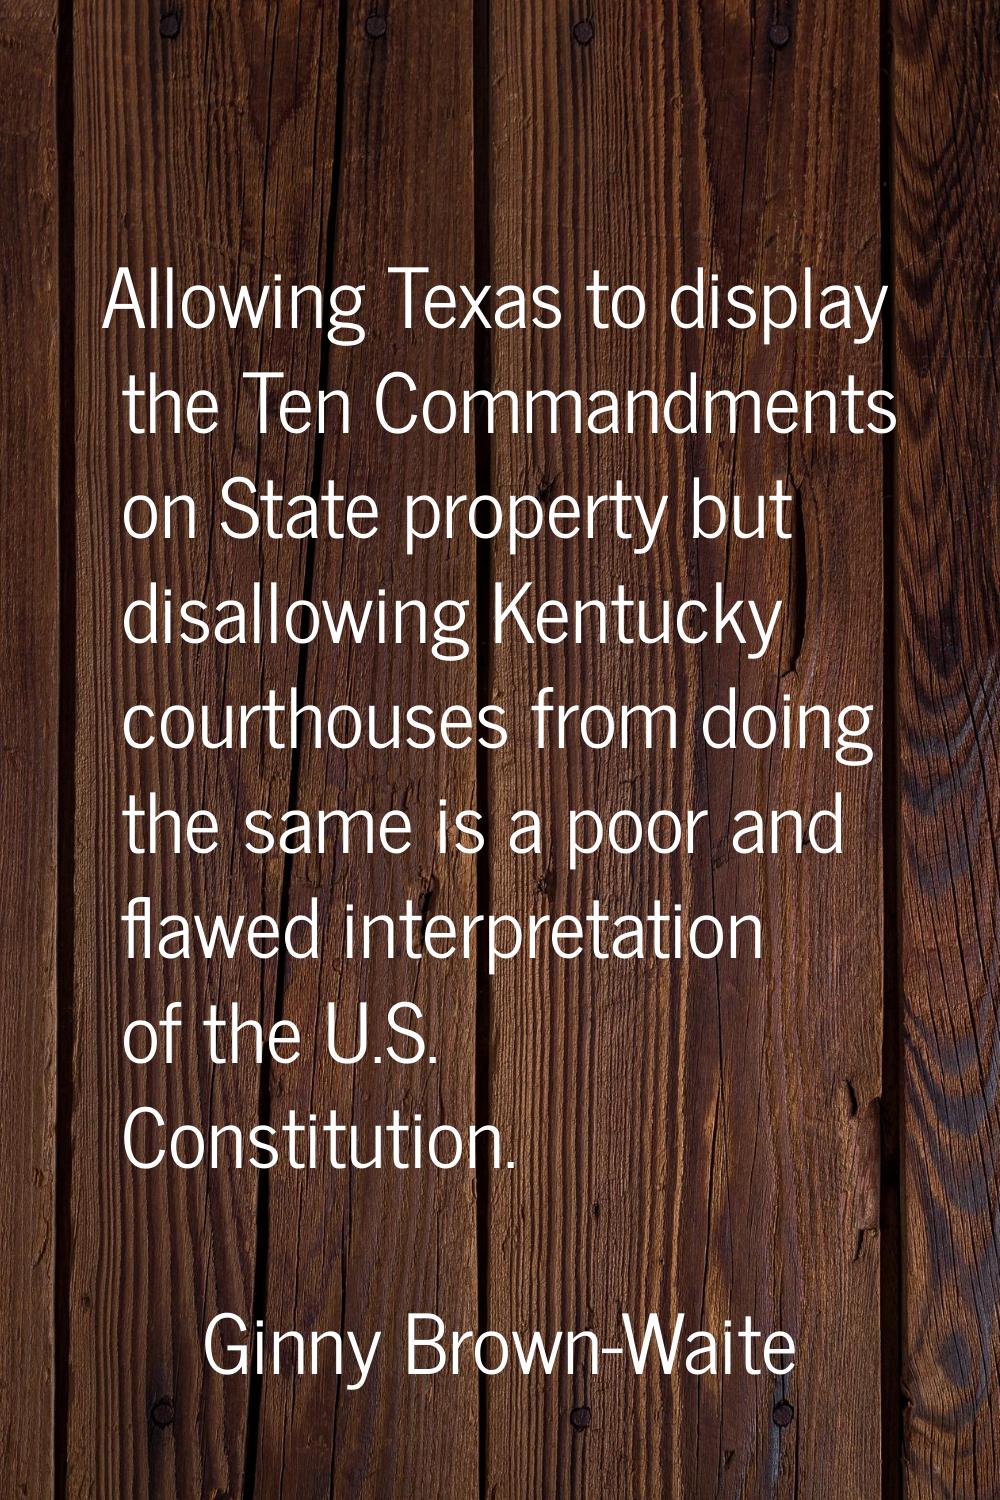 Allowing Texas to display the Ten Commandments on State property but disallowing Kentucky courthous